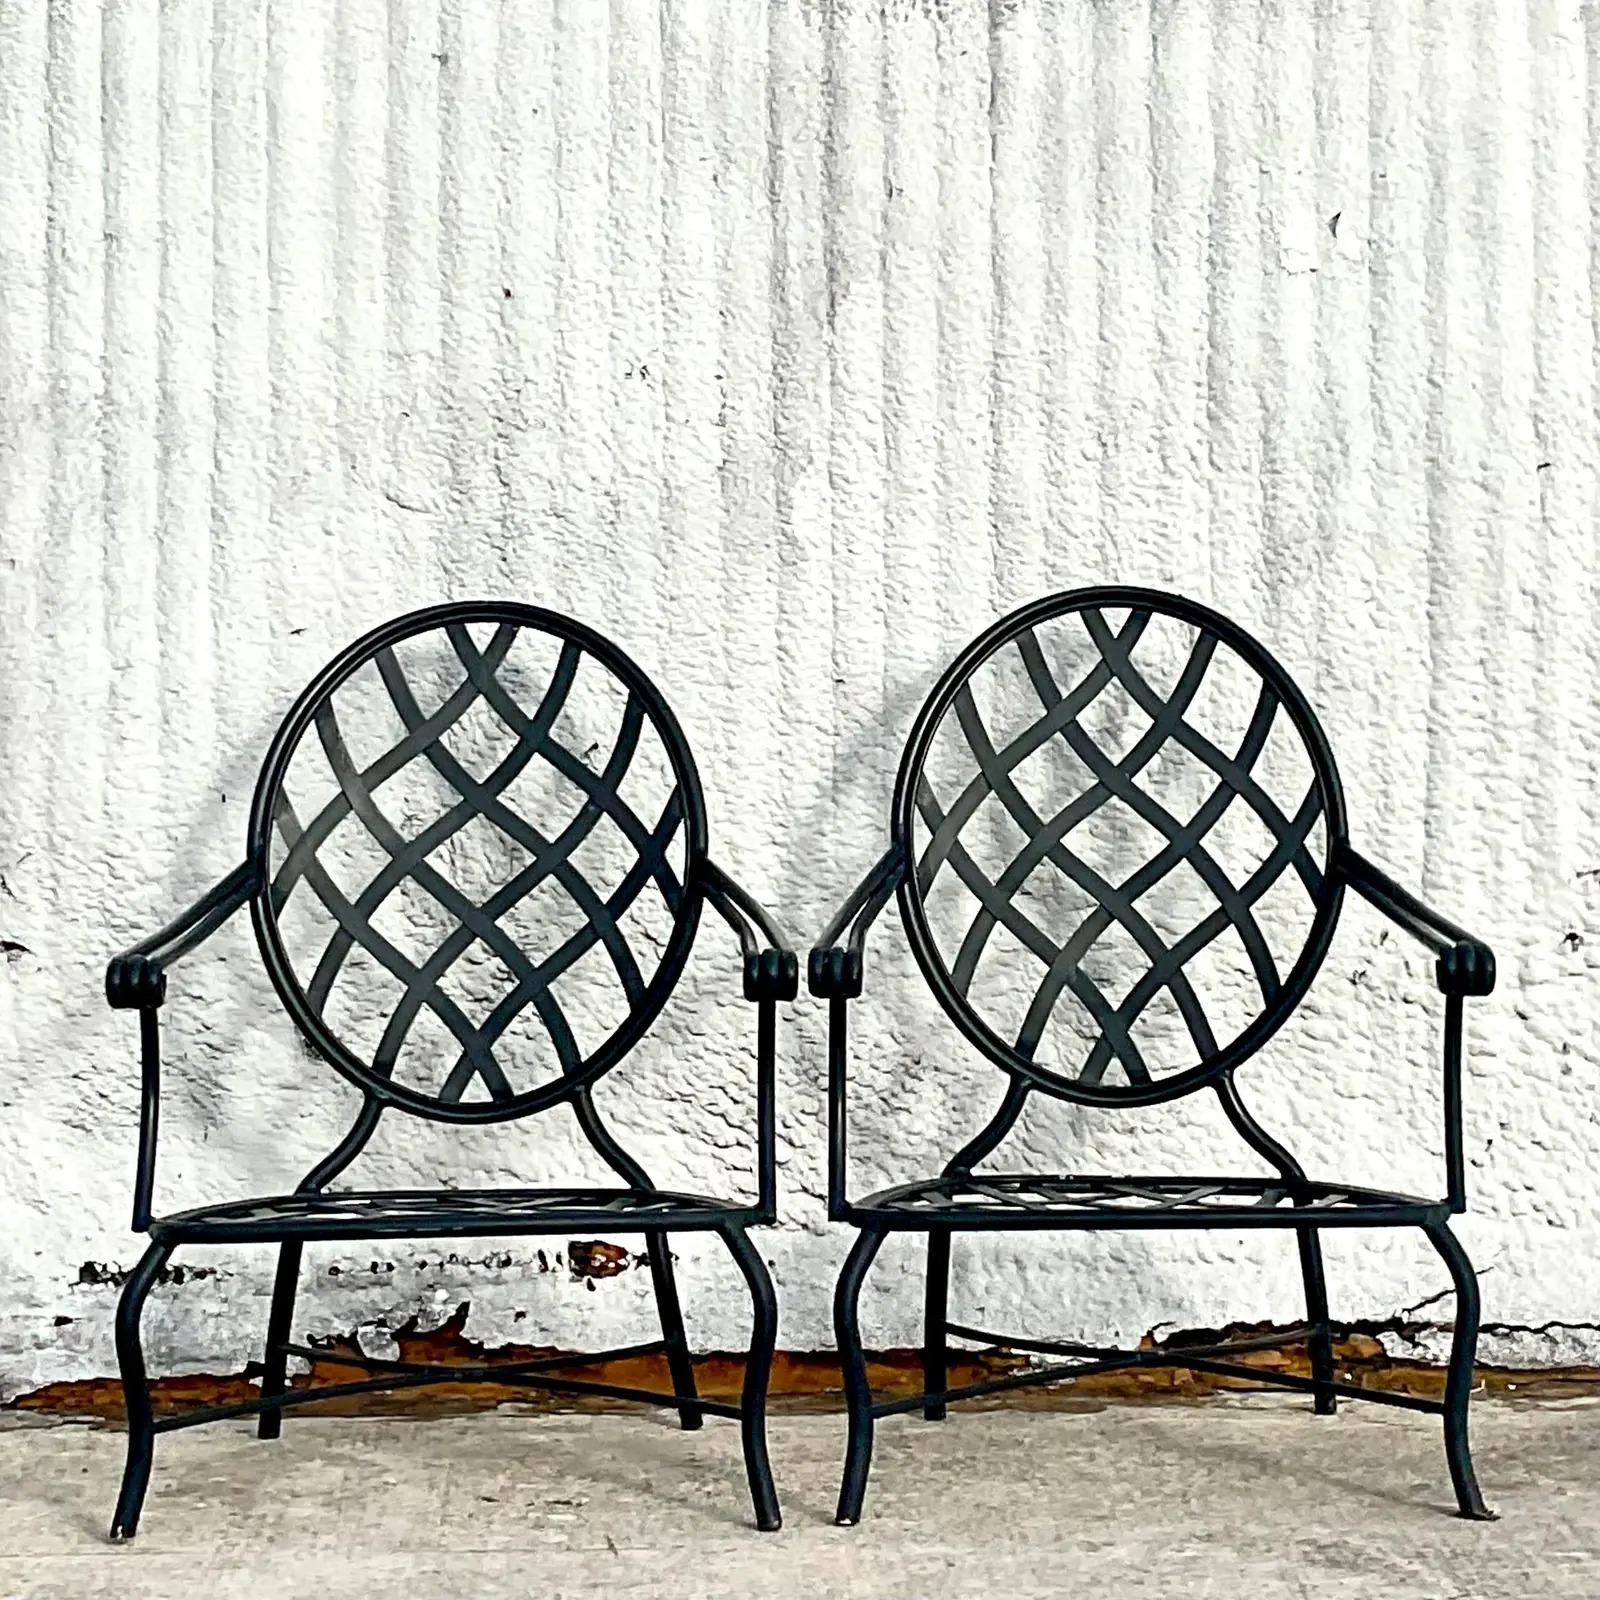 A fabulous pair of vintage Coastal outdoor lounge chairs. Made by the iconic Brown Jordan group. A chic lattice design crafted in aluminum. Tagged. Matching dining chairs also available. Acquired from a Palm Beach estate.